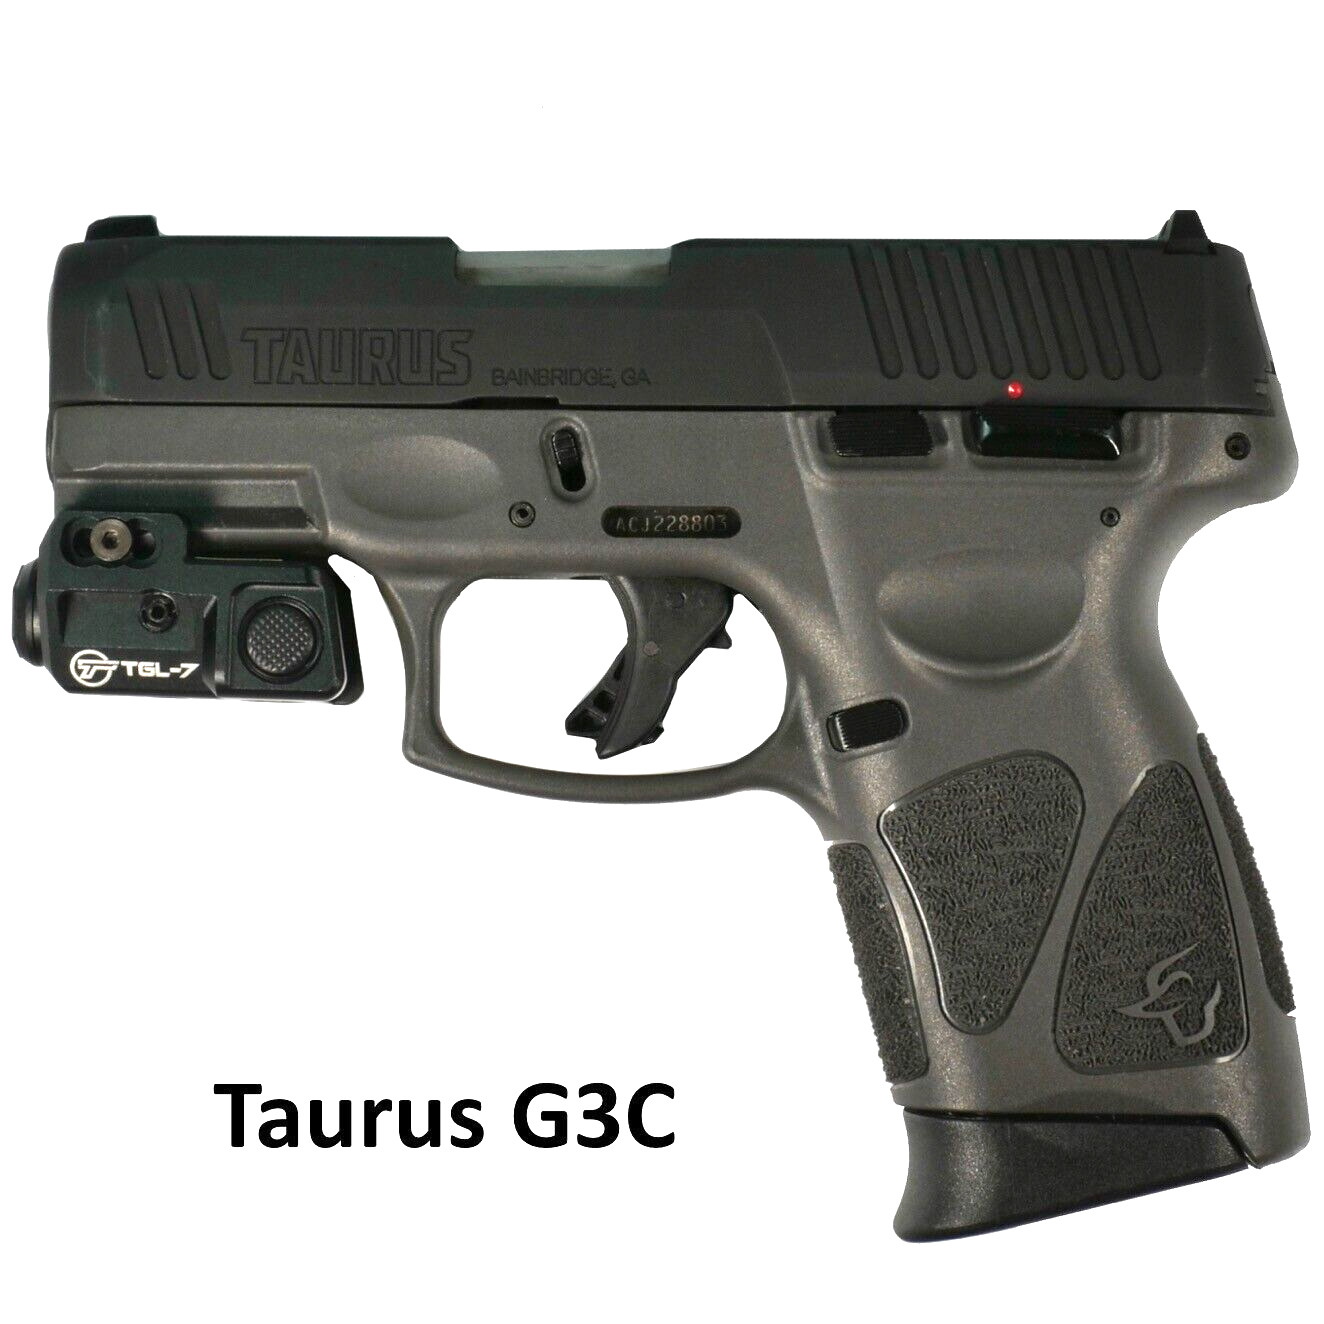 GREEN LASER SIGHT FOR COMPACT SUBCOMPACT TAURUS G2C G3C GLOCK RUGER CANIK TGL-7